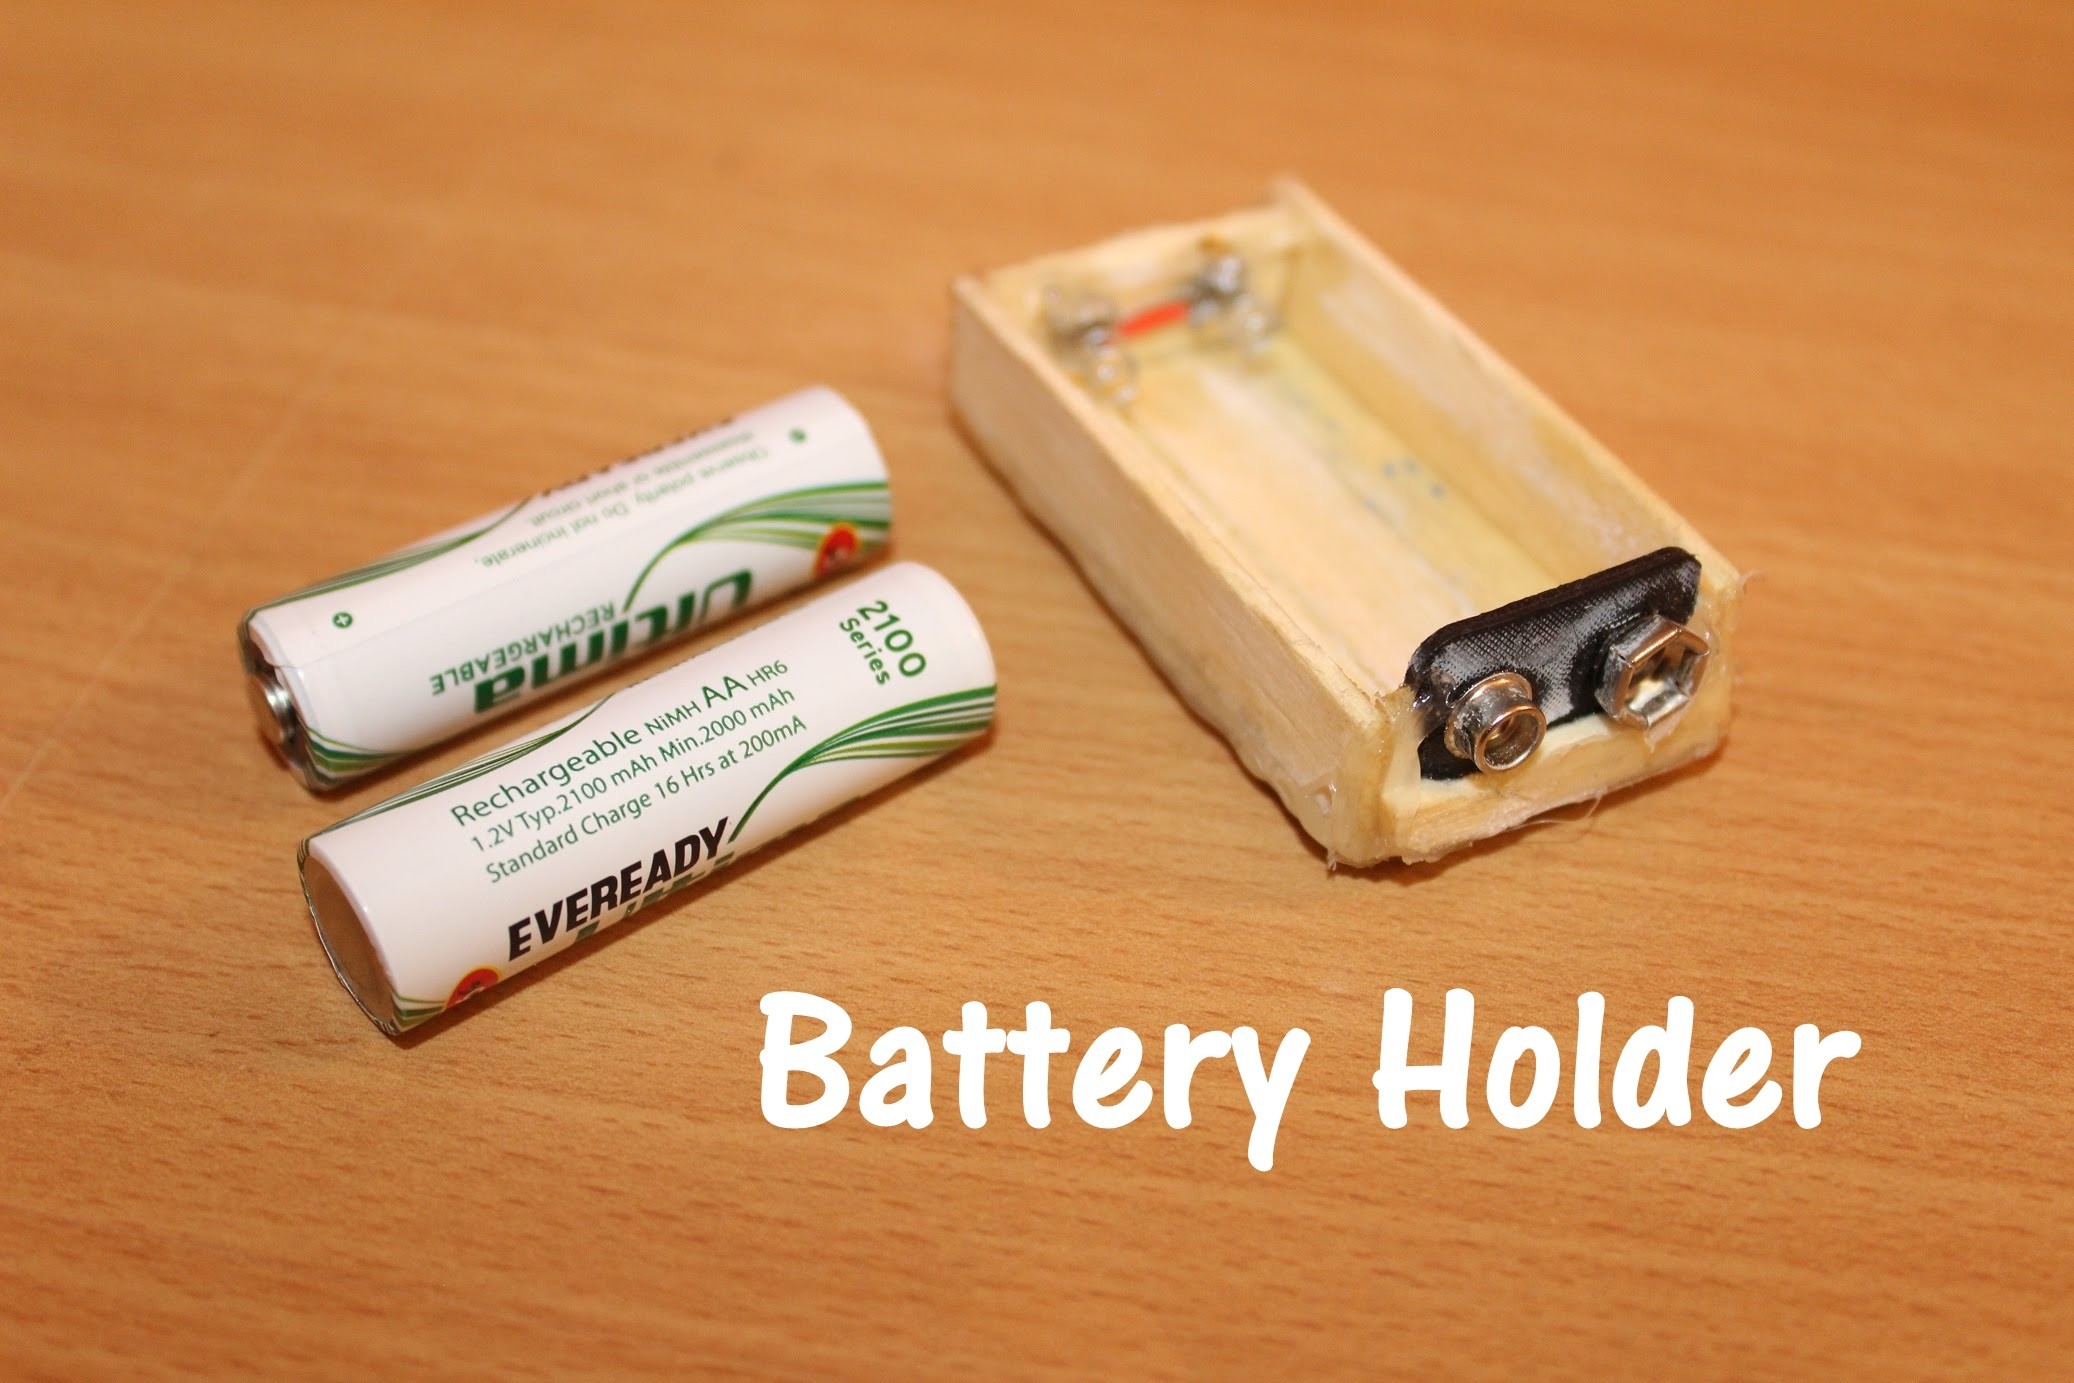 To make battery